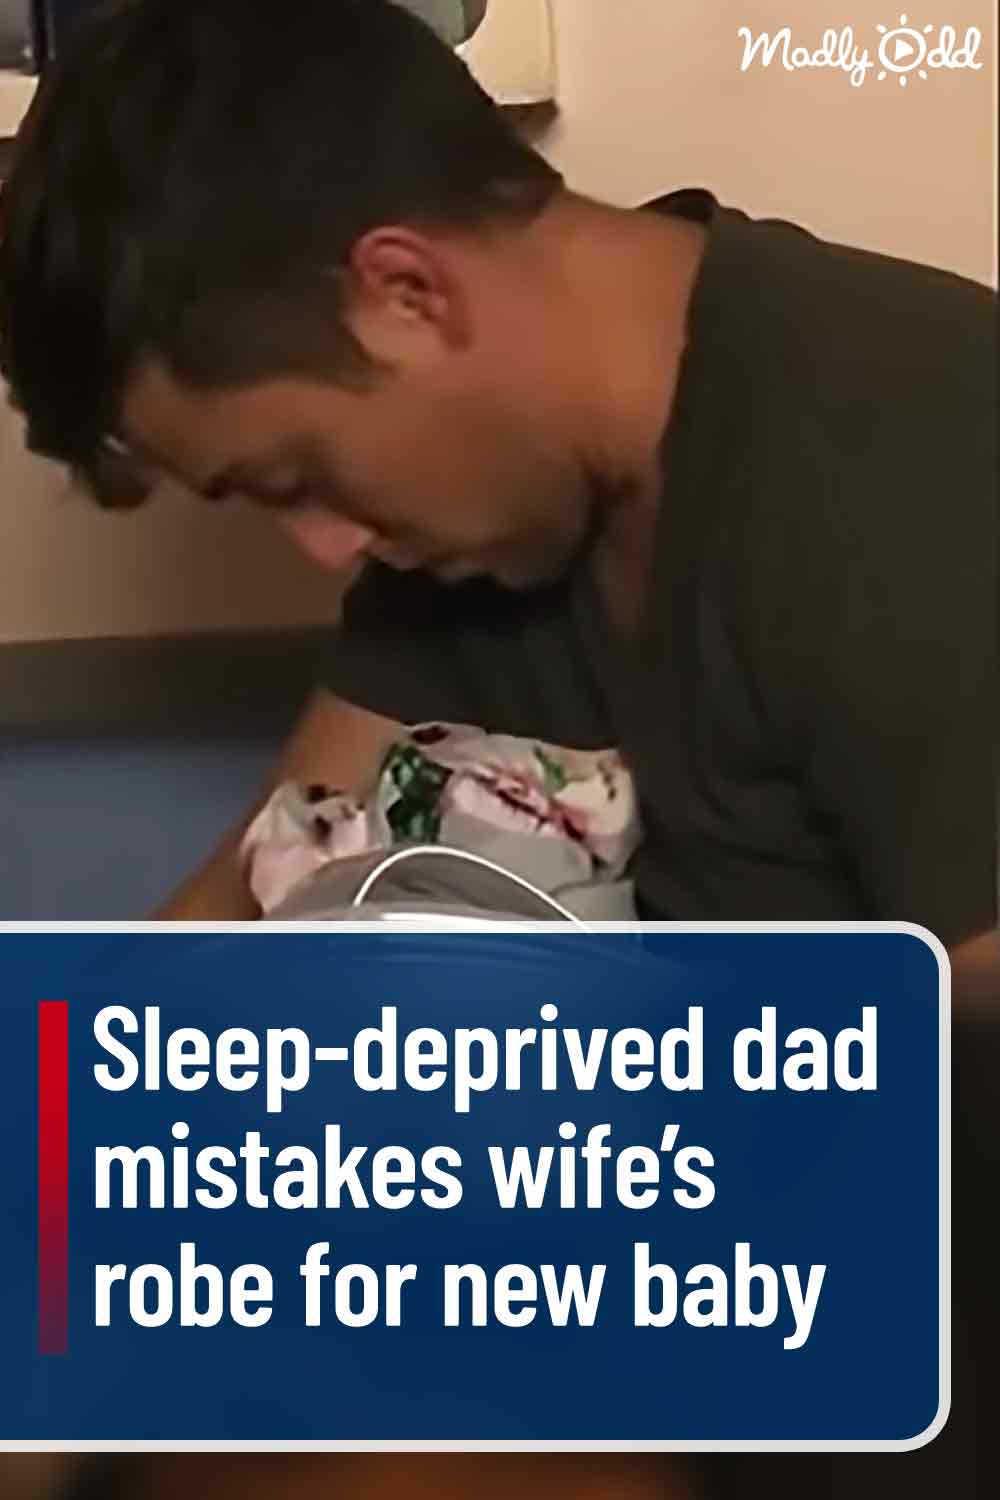 Sleep-deprived dad mistakes wife’s robe for new baby